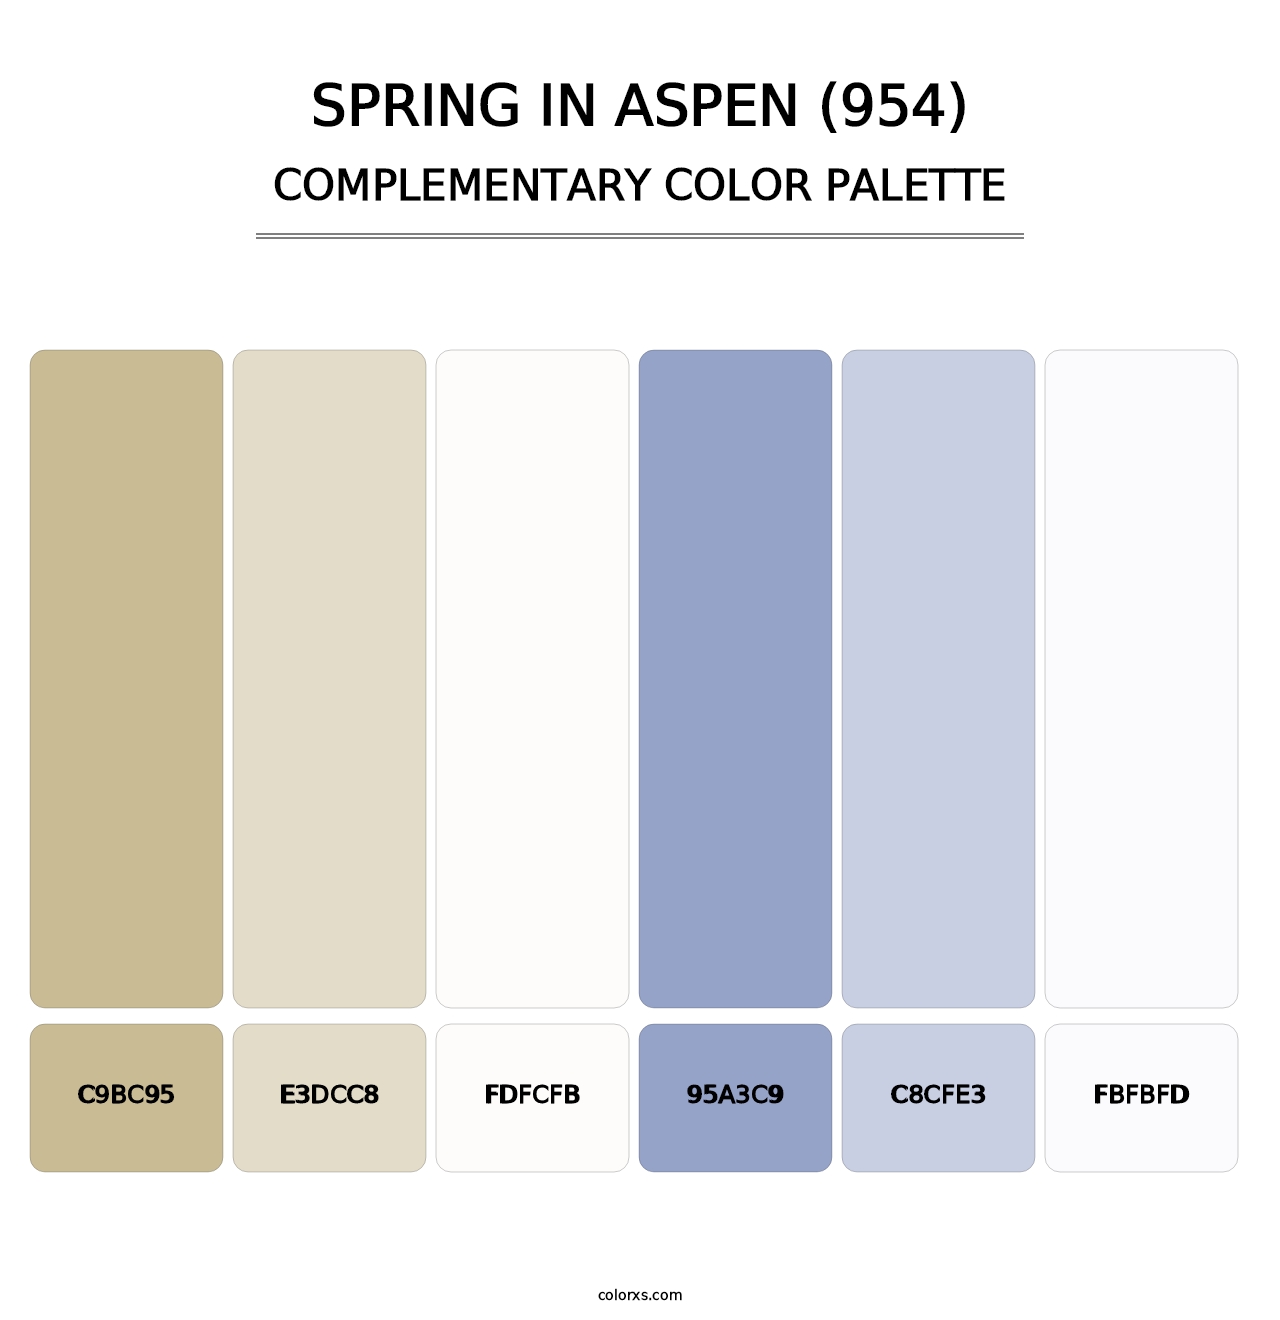 Spring in Aspen (954) - Complementary Color Palette